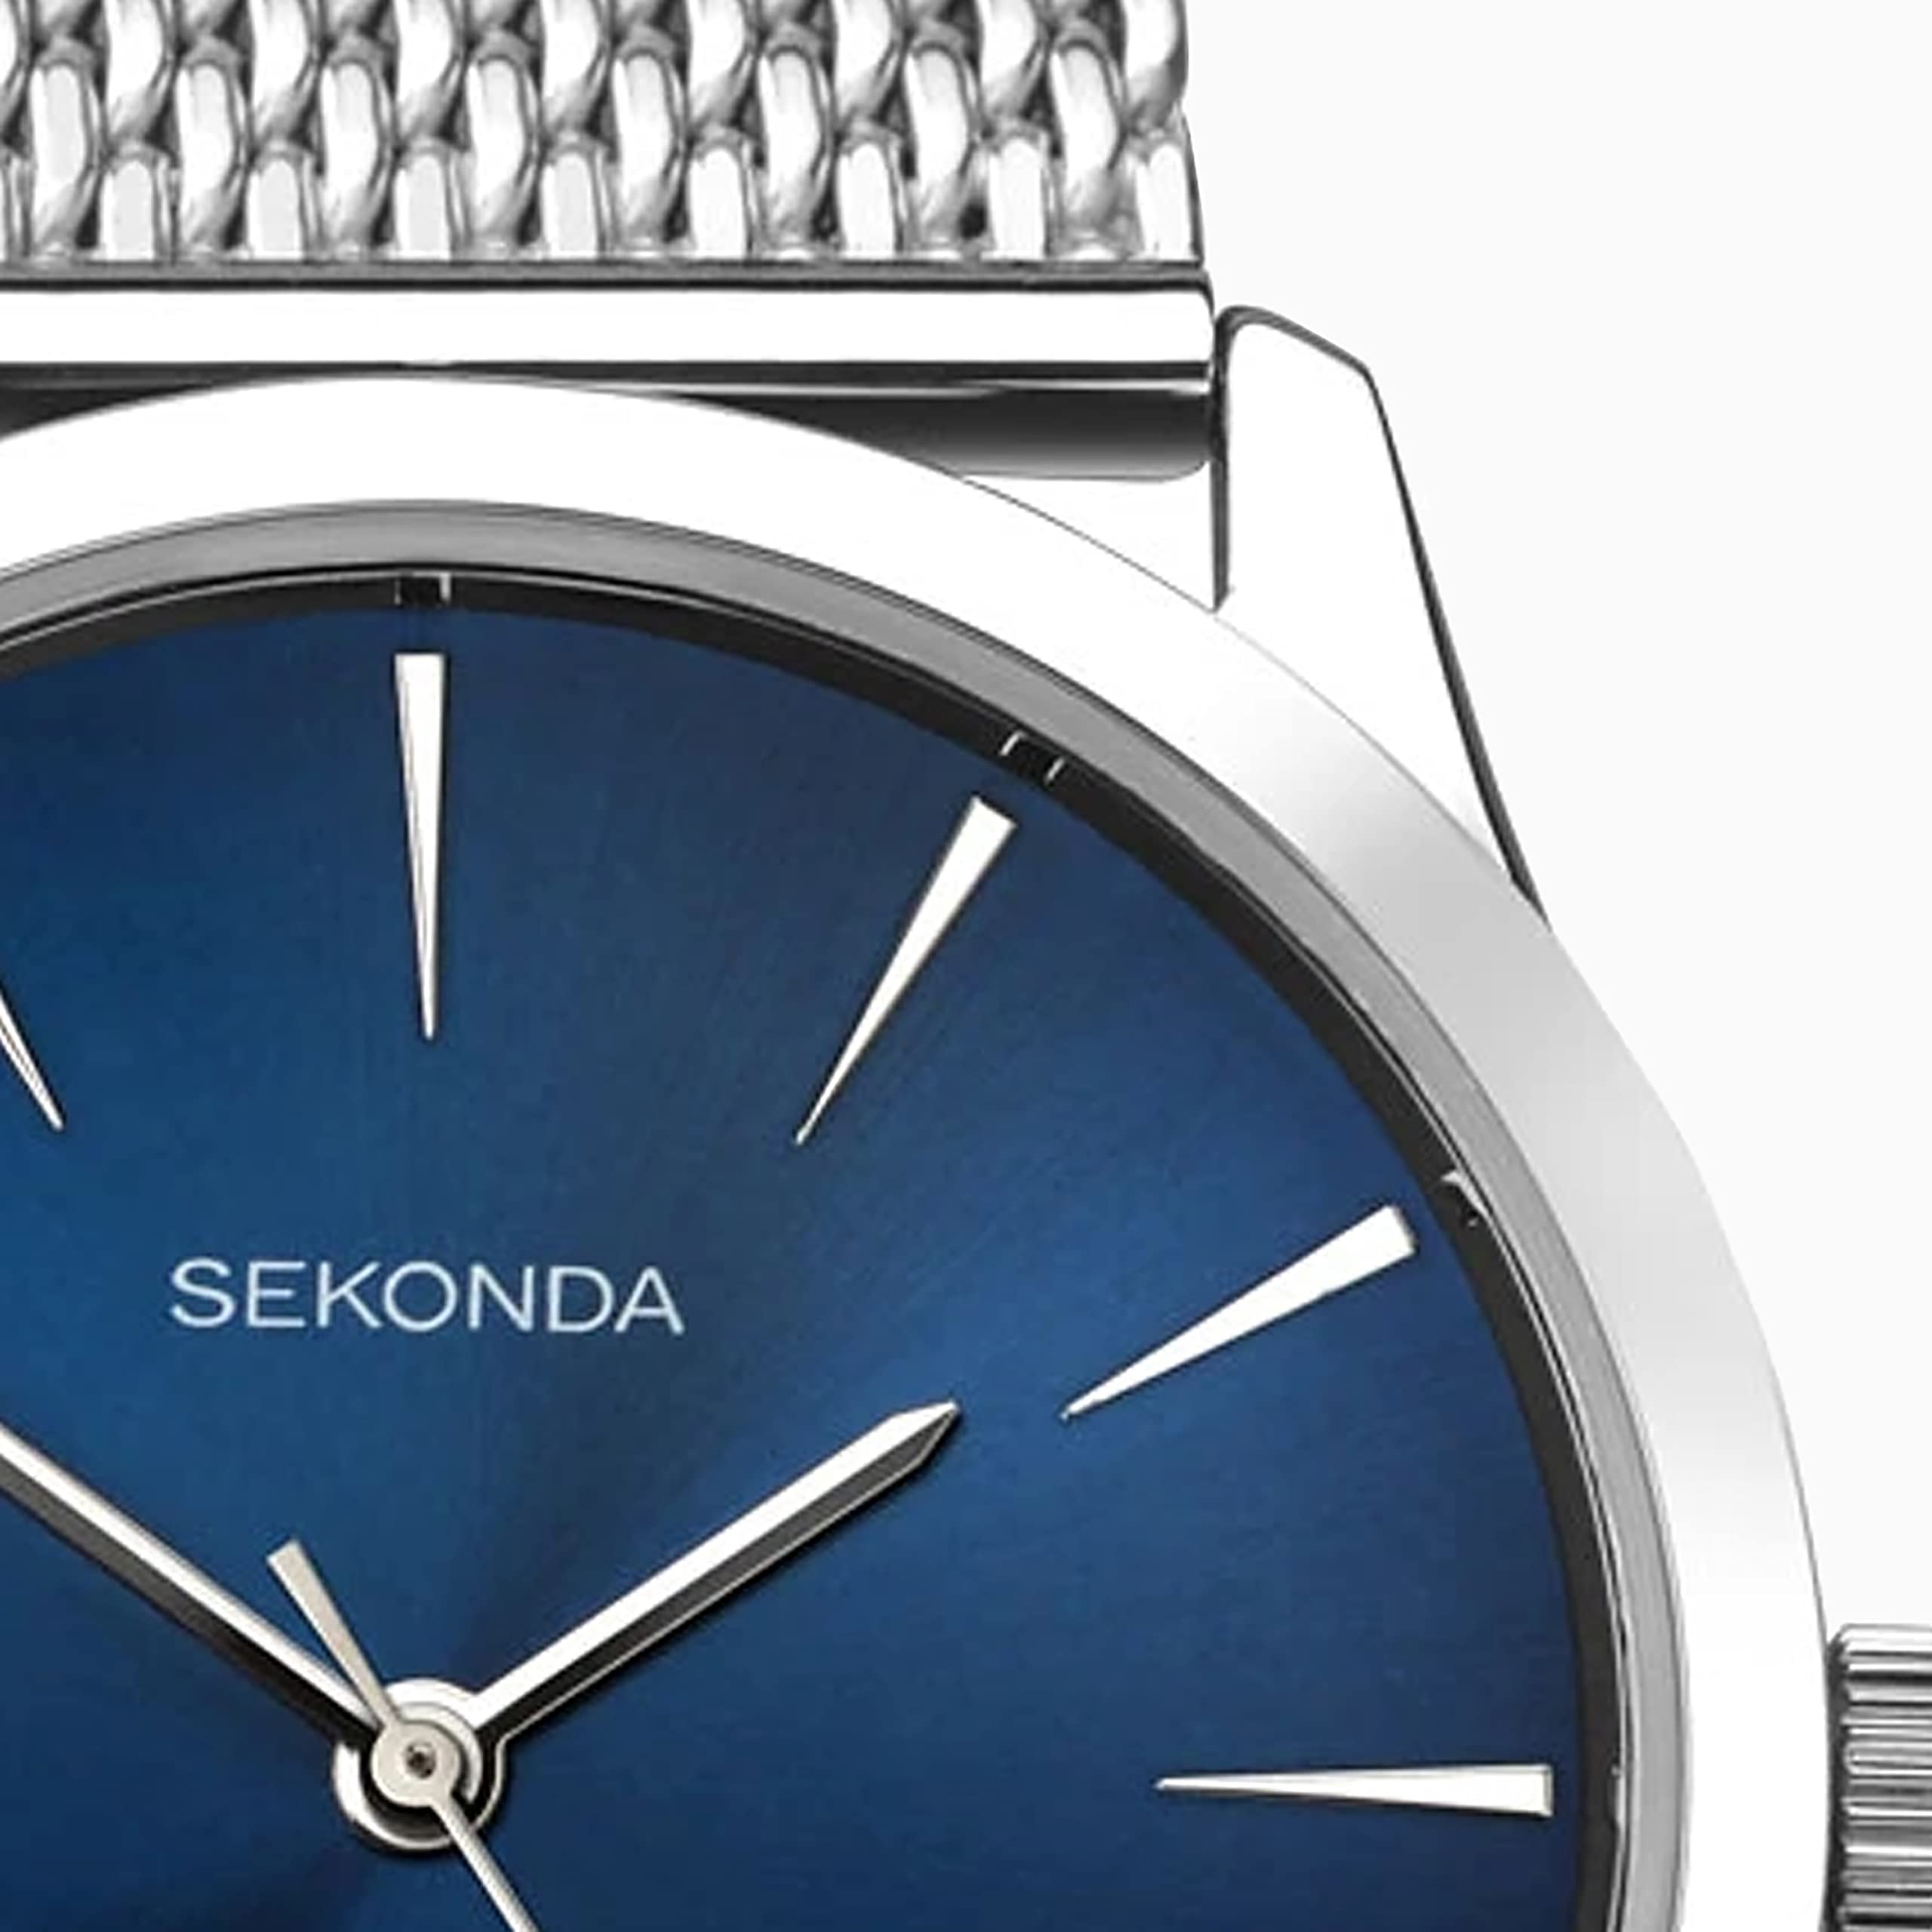 Sekonda Men's Quartz Watch with Blue Dial Analogue Display and Silver Stainless Steel Bracelet 1065.27